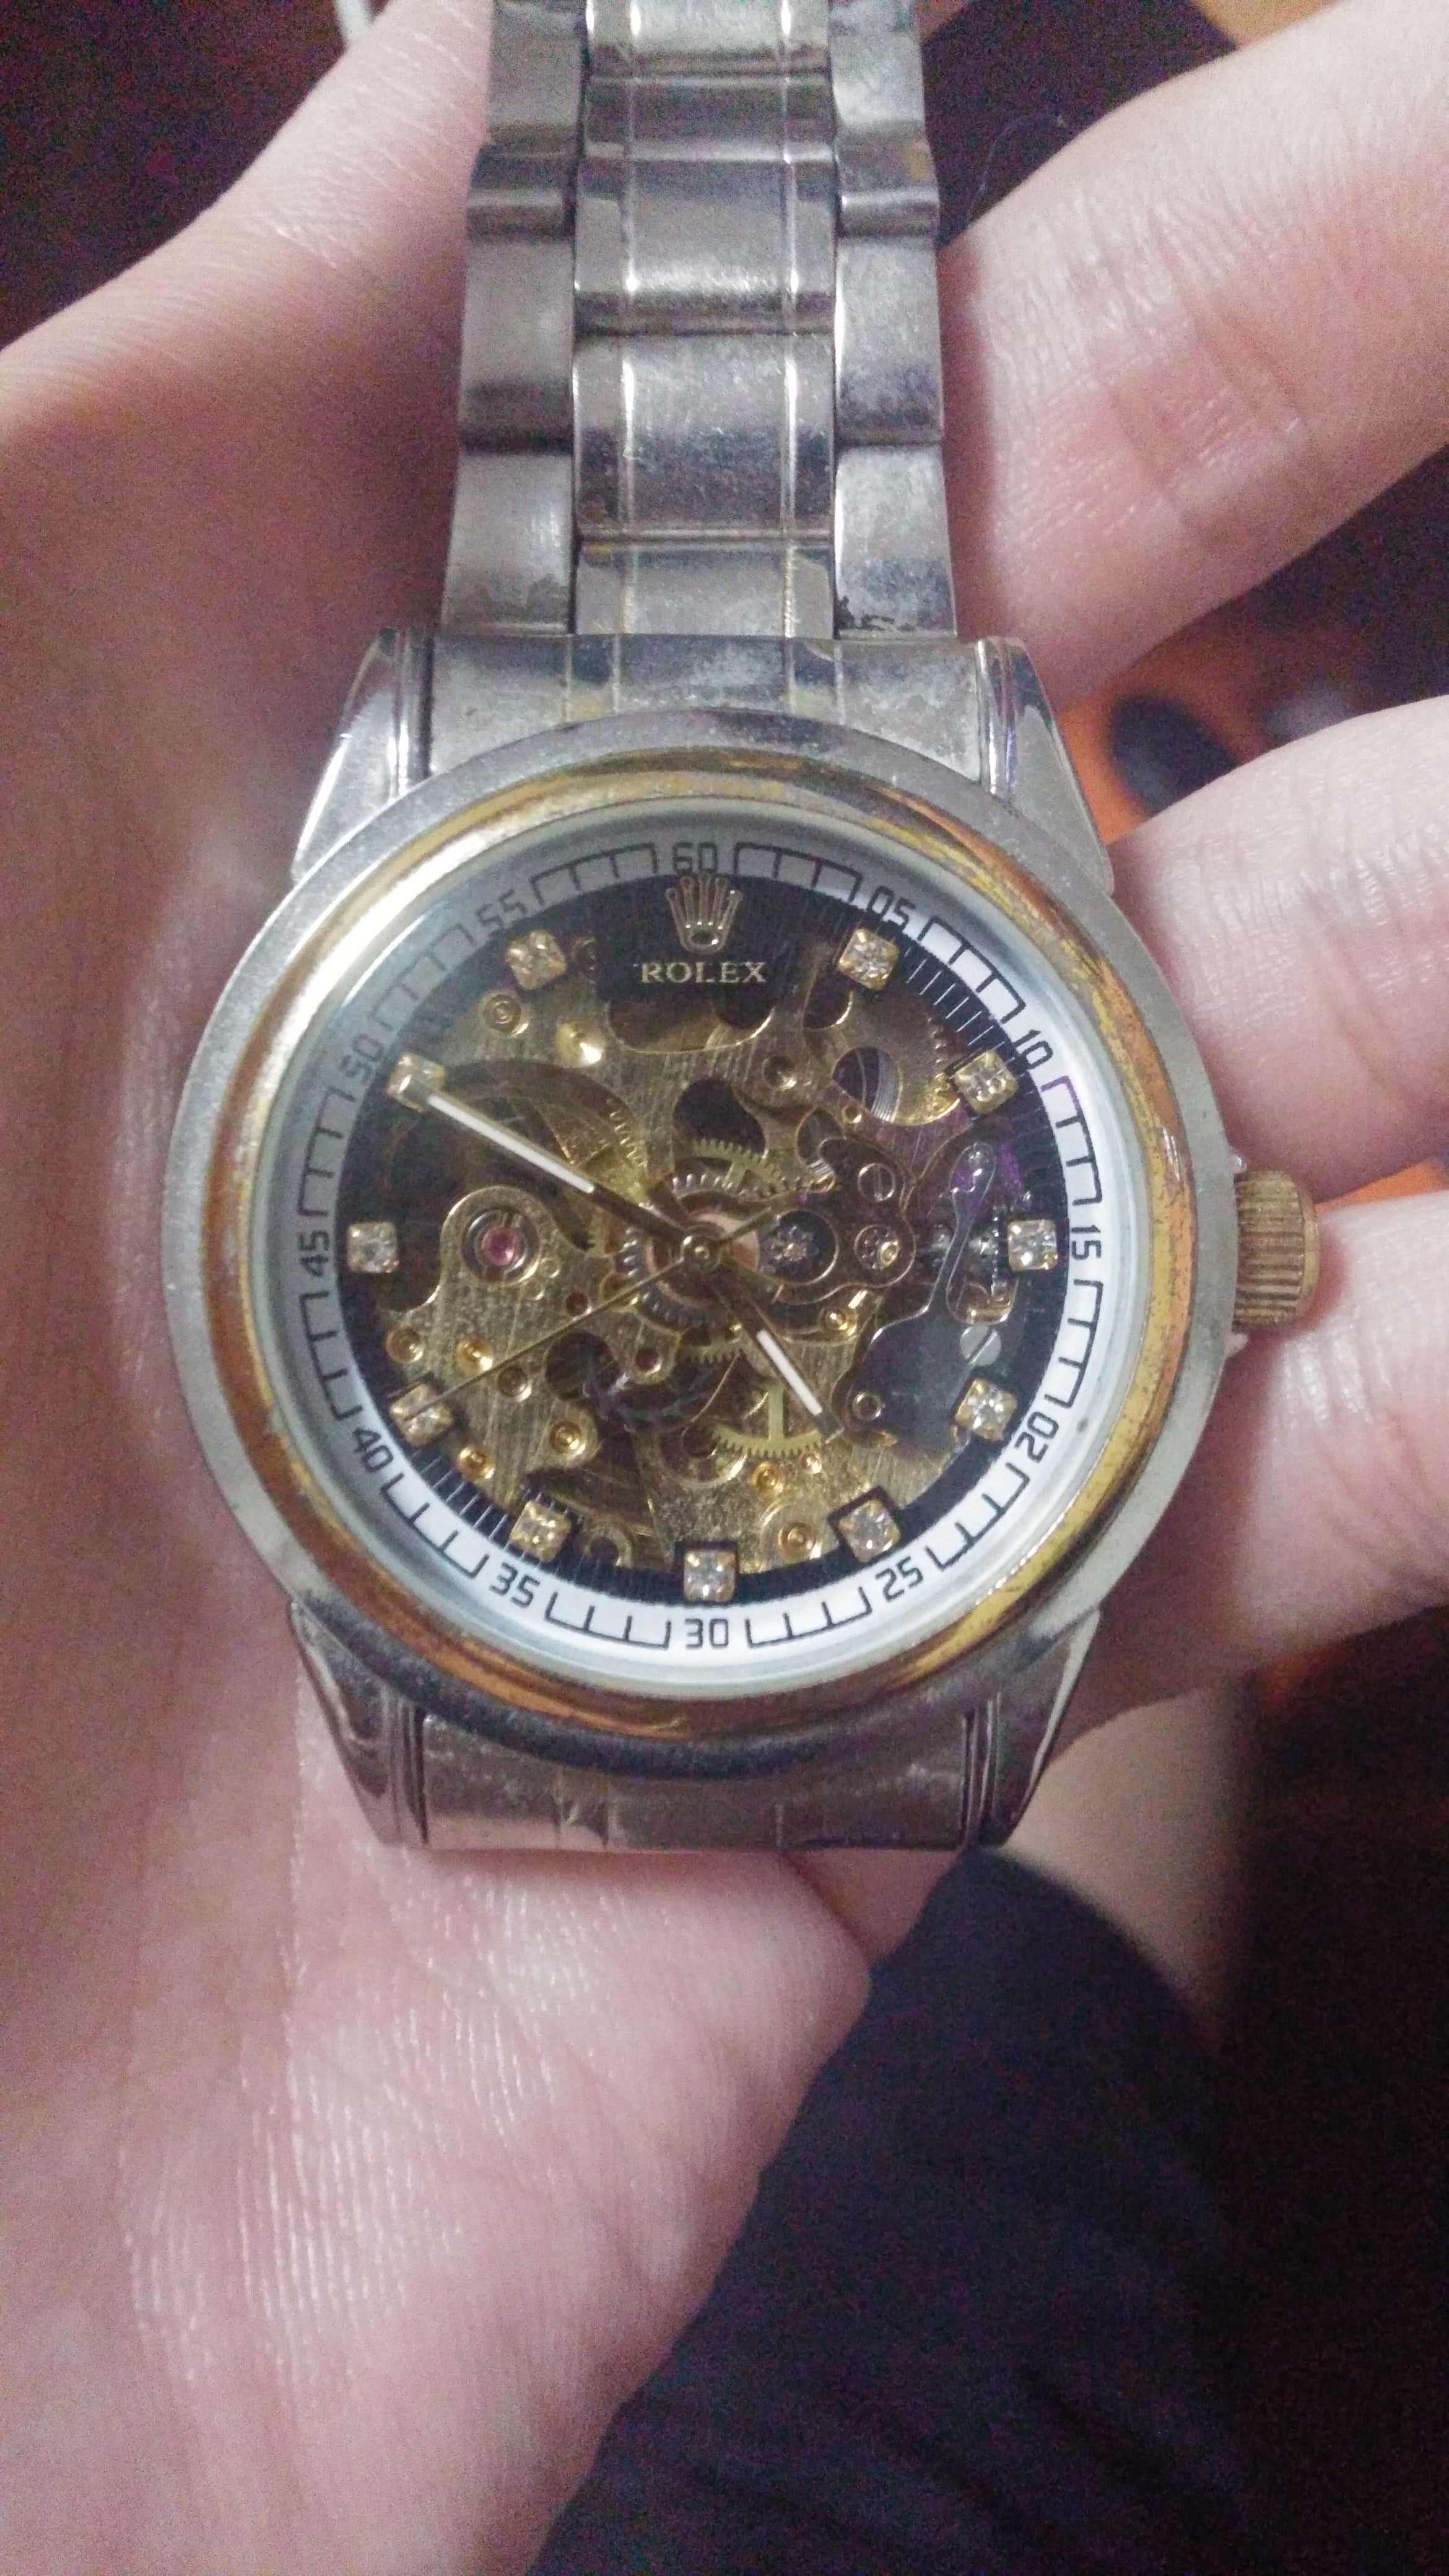 Need urgent help identifying watch and 